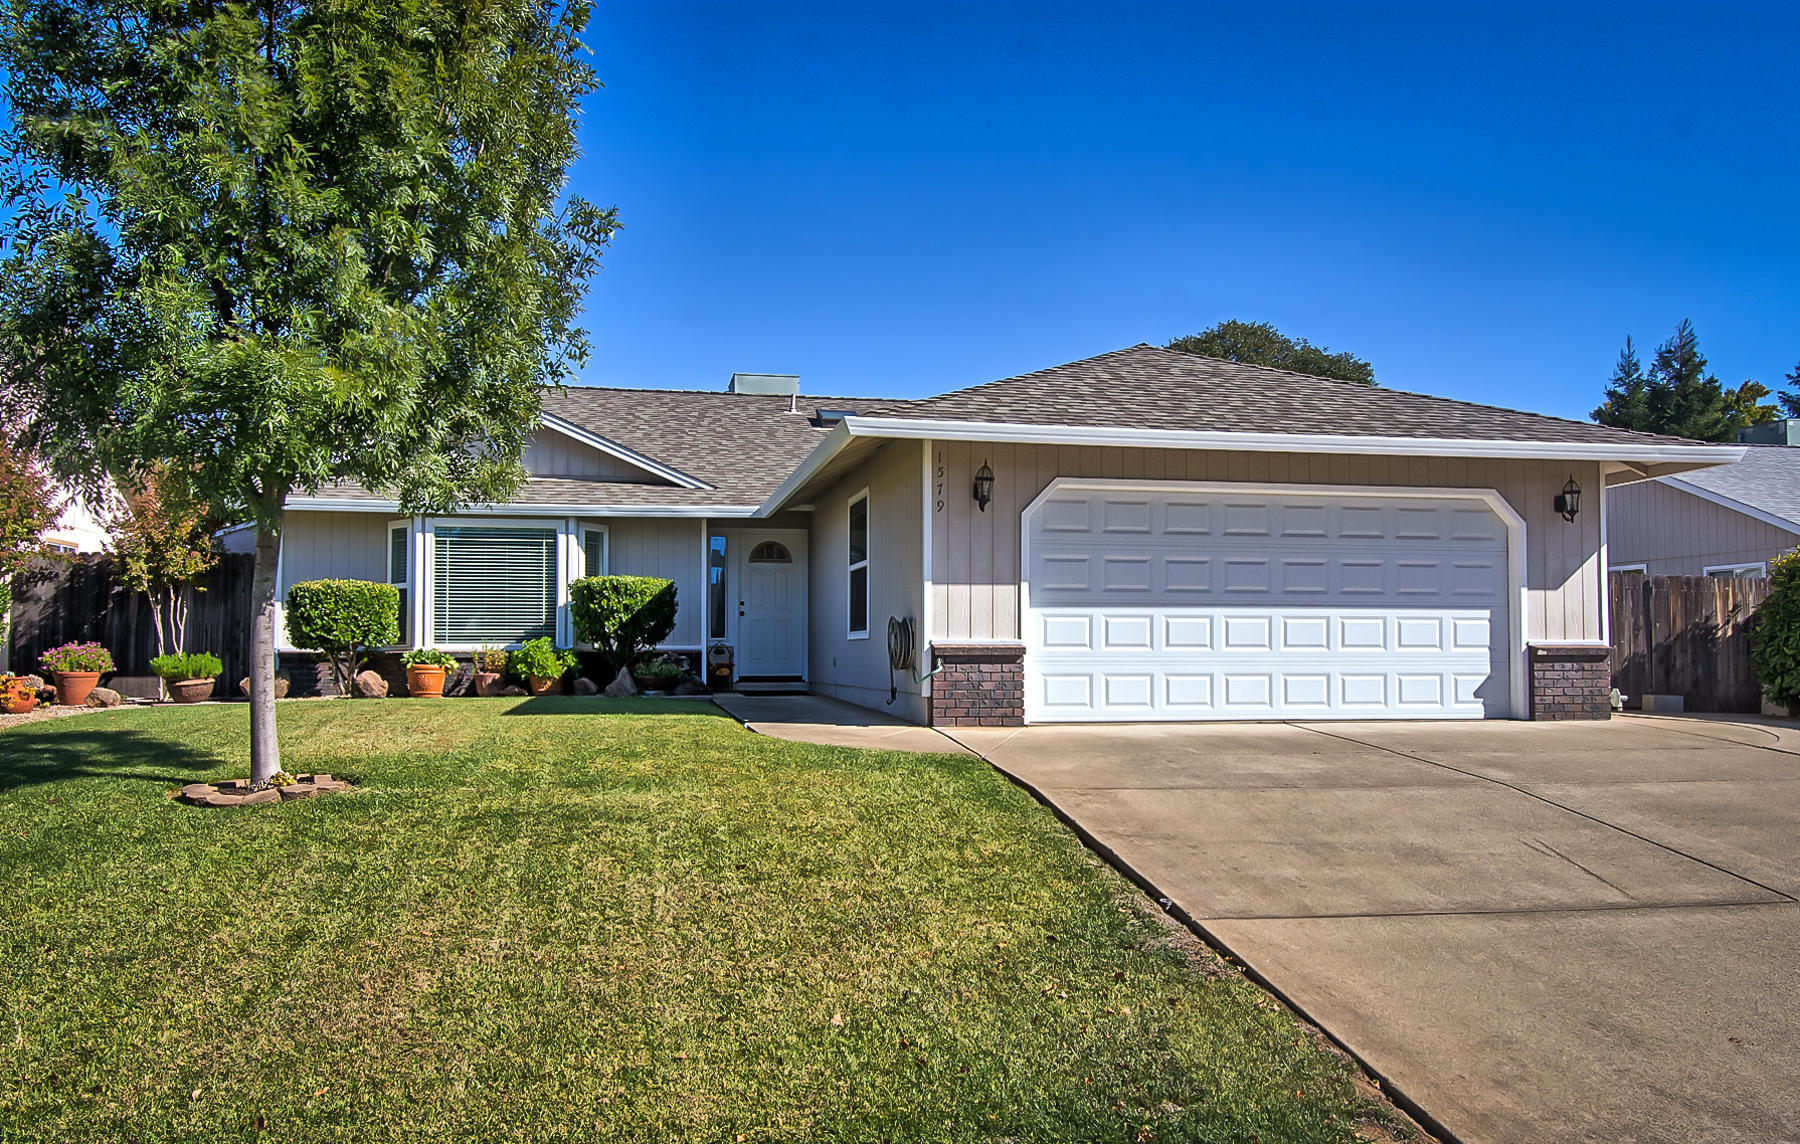 3 Bed 2 Baths Home In Redding For 349000 pertaining to proportions 1800 X 1144